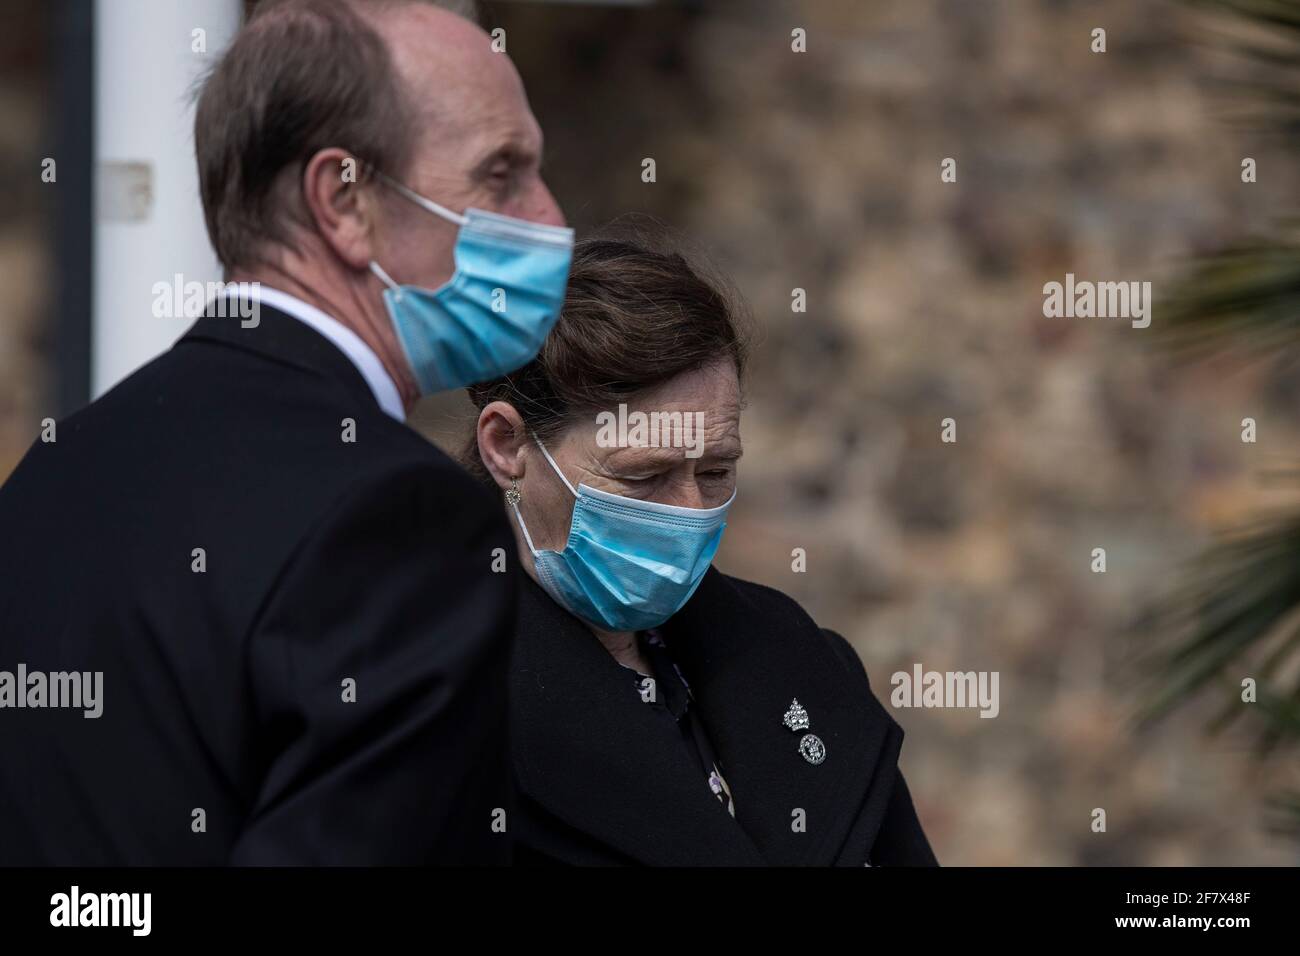 Cardiff, Wales, UK. 10th Apr, 2021. A woman wearing a royal crown broche appears emotional outside Cardiff Castle in Cardiff city centre as a behind-closed-doors gun salute is held in the castle grounds to mark the death of Prince Philip. Credit: Mark Hawkins/Alamy Live News Stock Photo